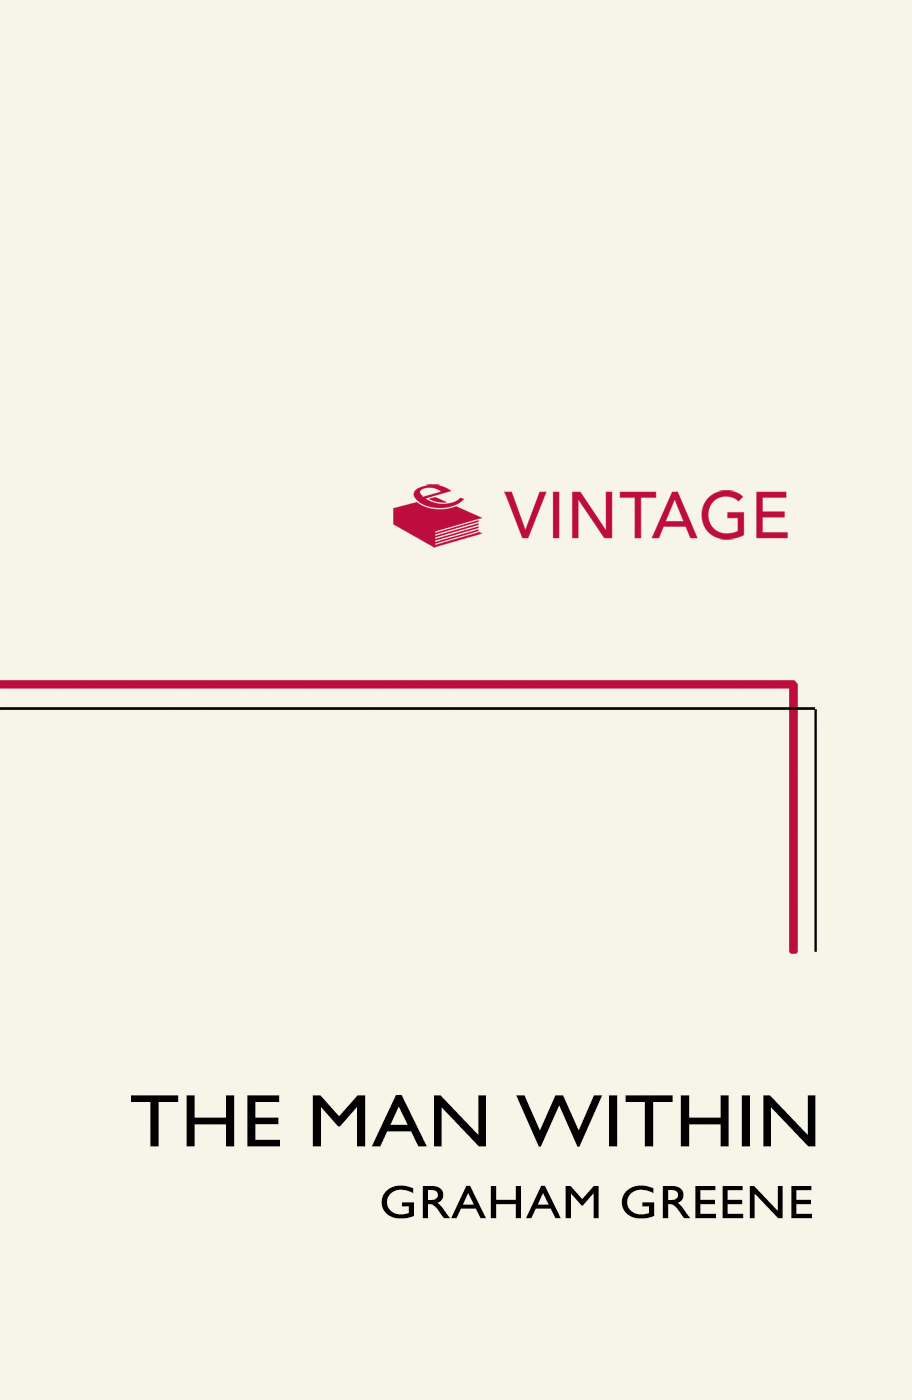 The Man Within by Graham Greene